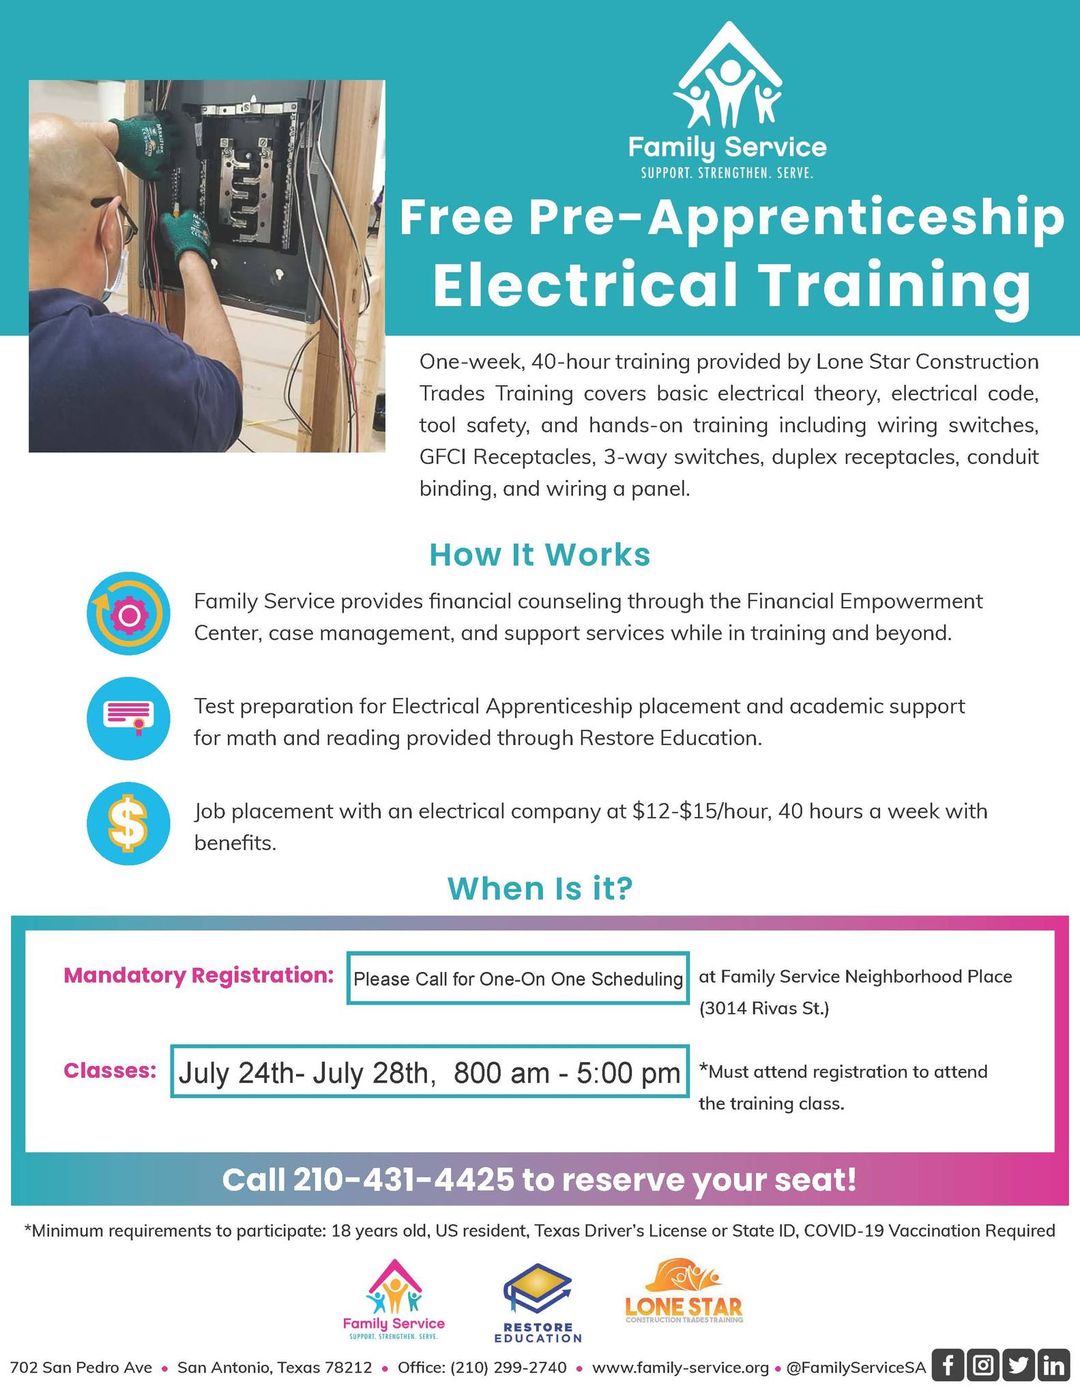 Free Pre-Apprenticeship Electrical Training